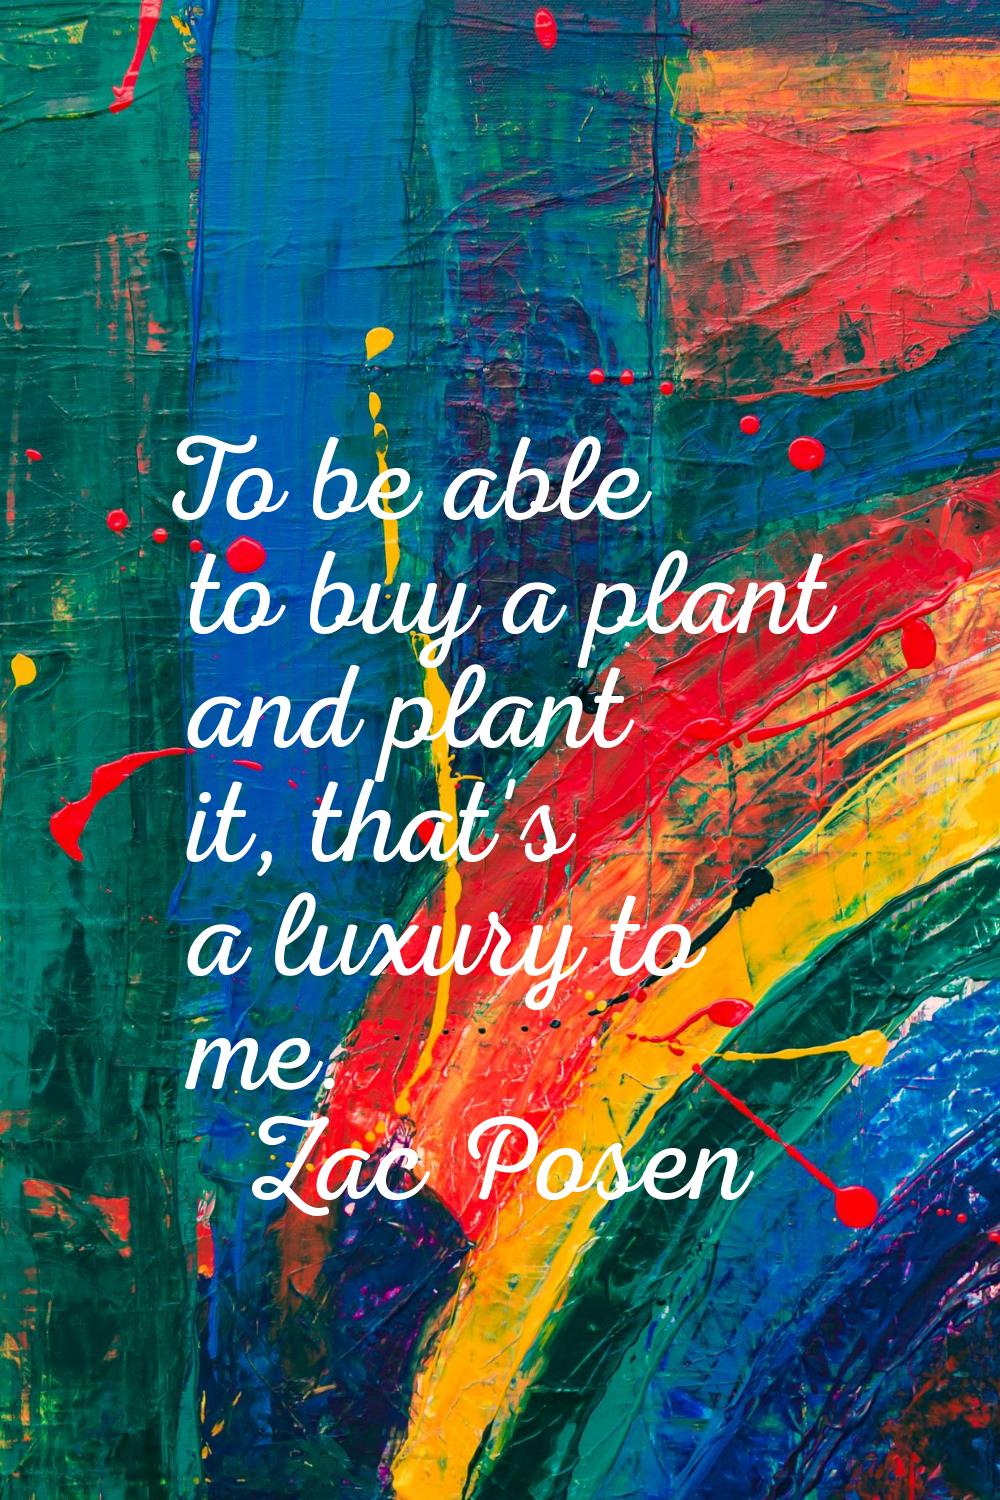 To be able to buy a plant and plant it, that's a luxury to me.